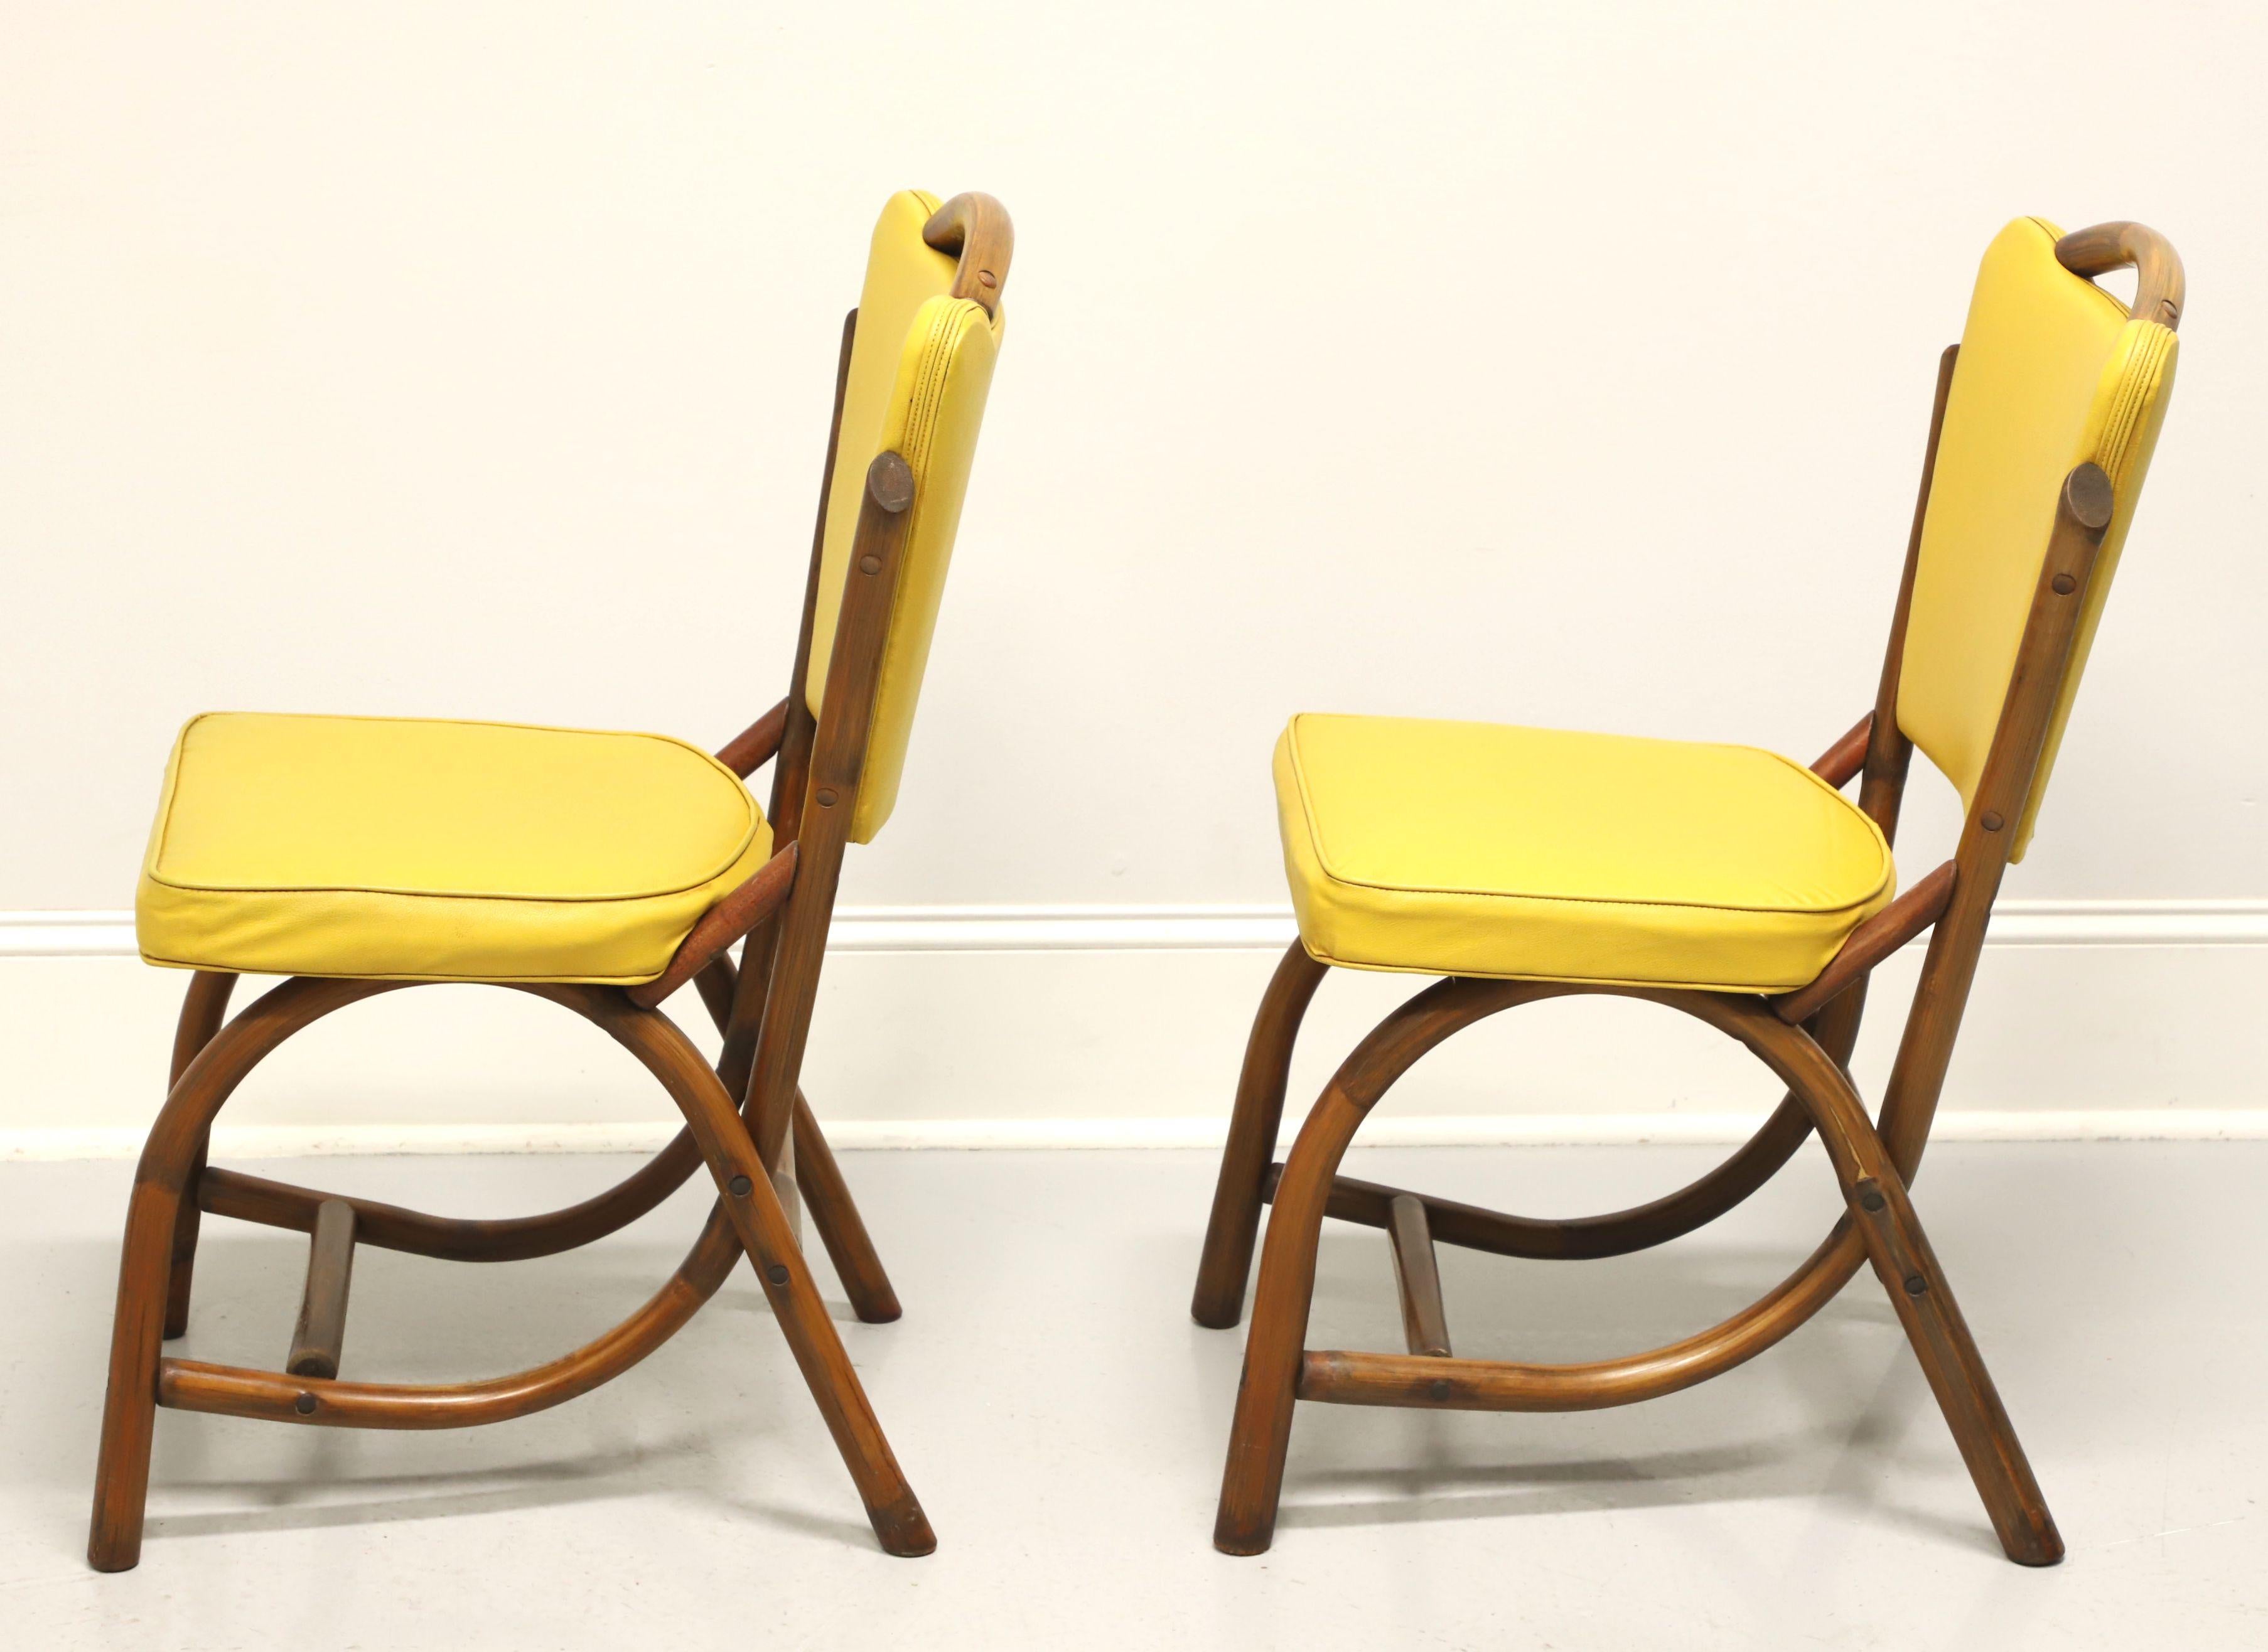 BAM-TAN 1960's Rattan Dining Side Chairs - Pair B In Good Condition For Sale In Charlotte, NC